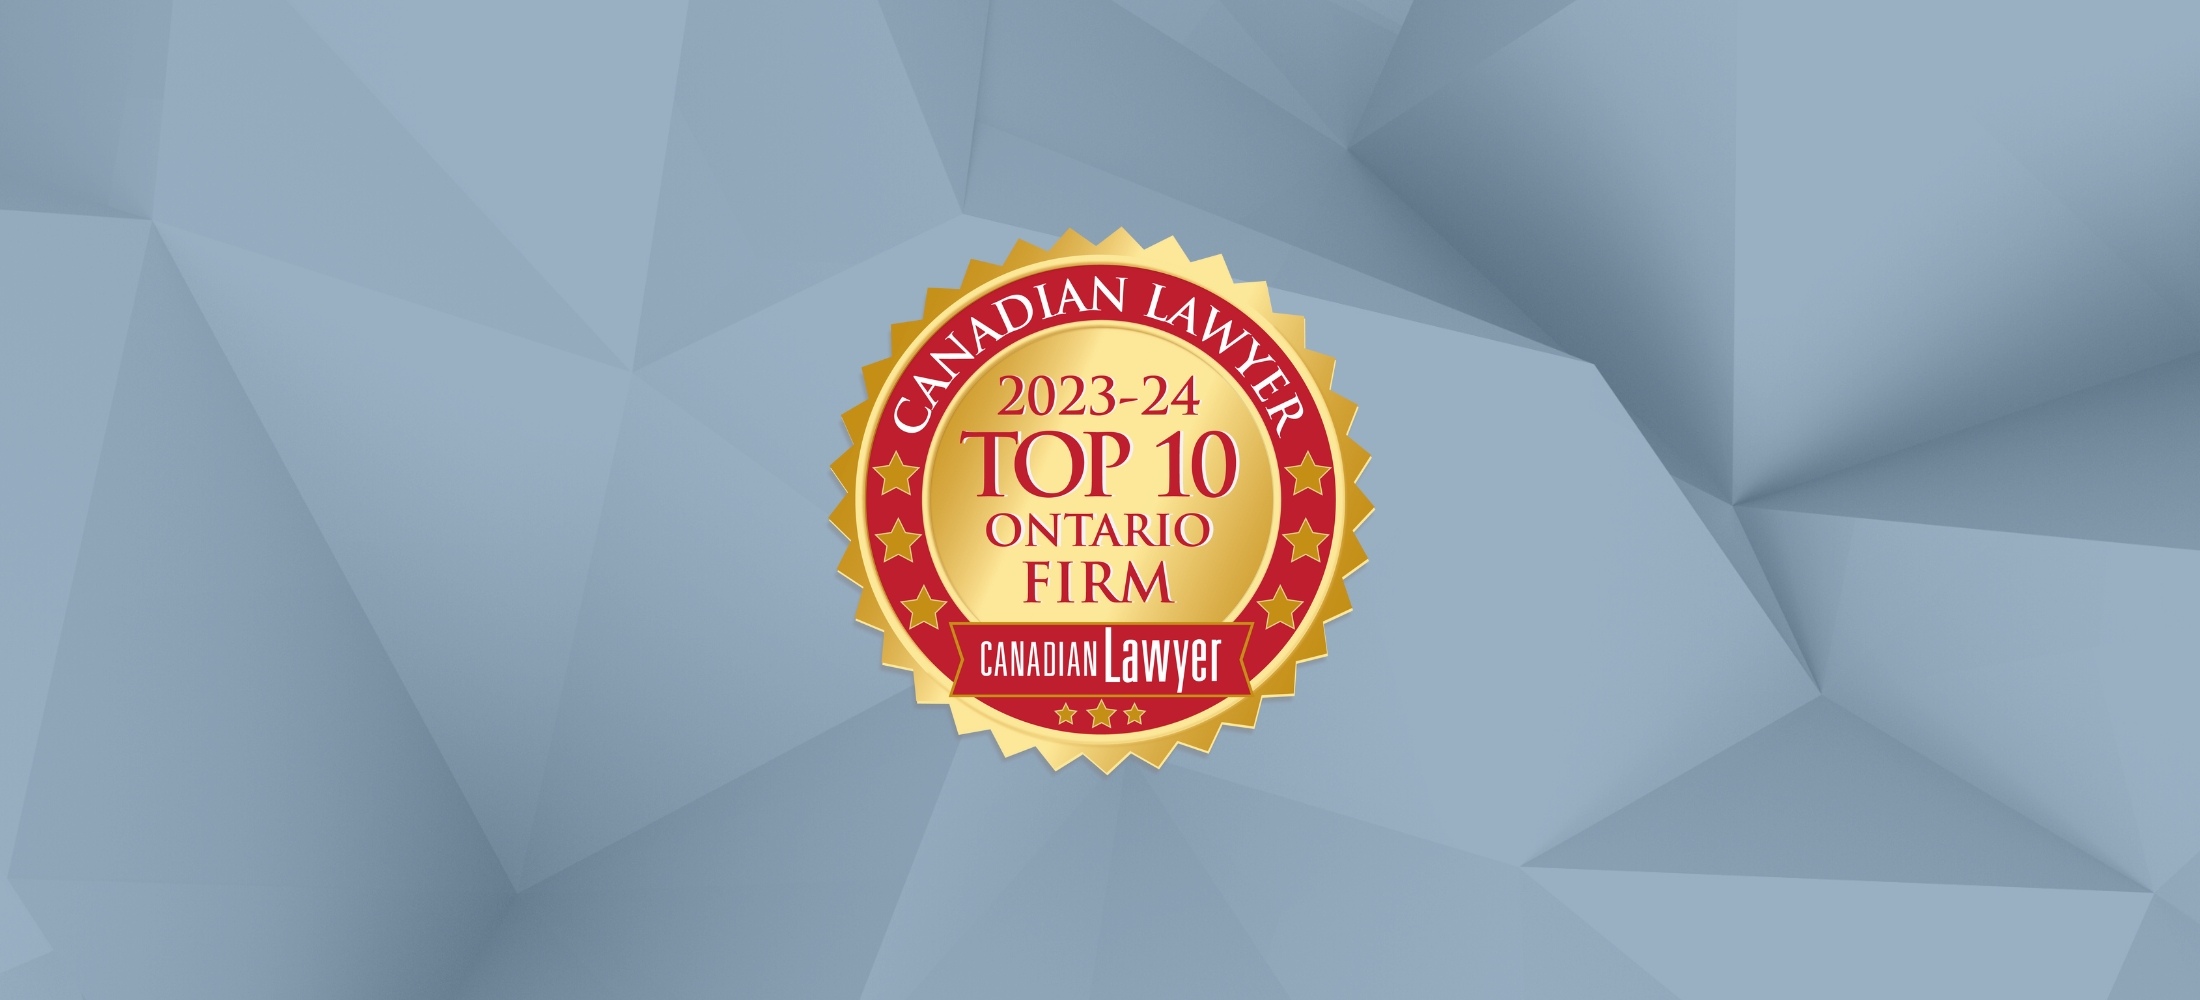 Image of Top 10 Ontario Firm badge